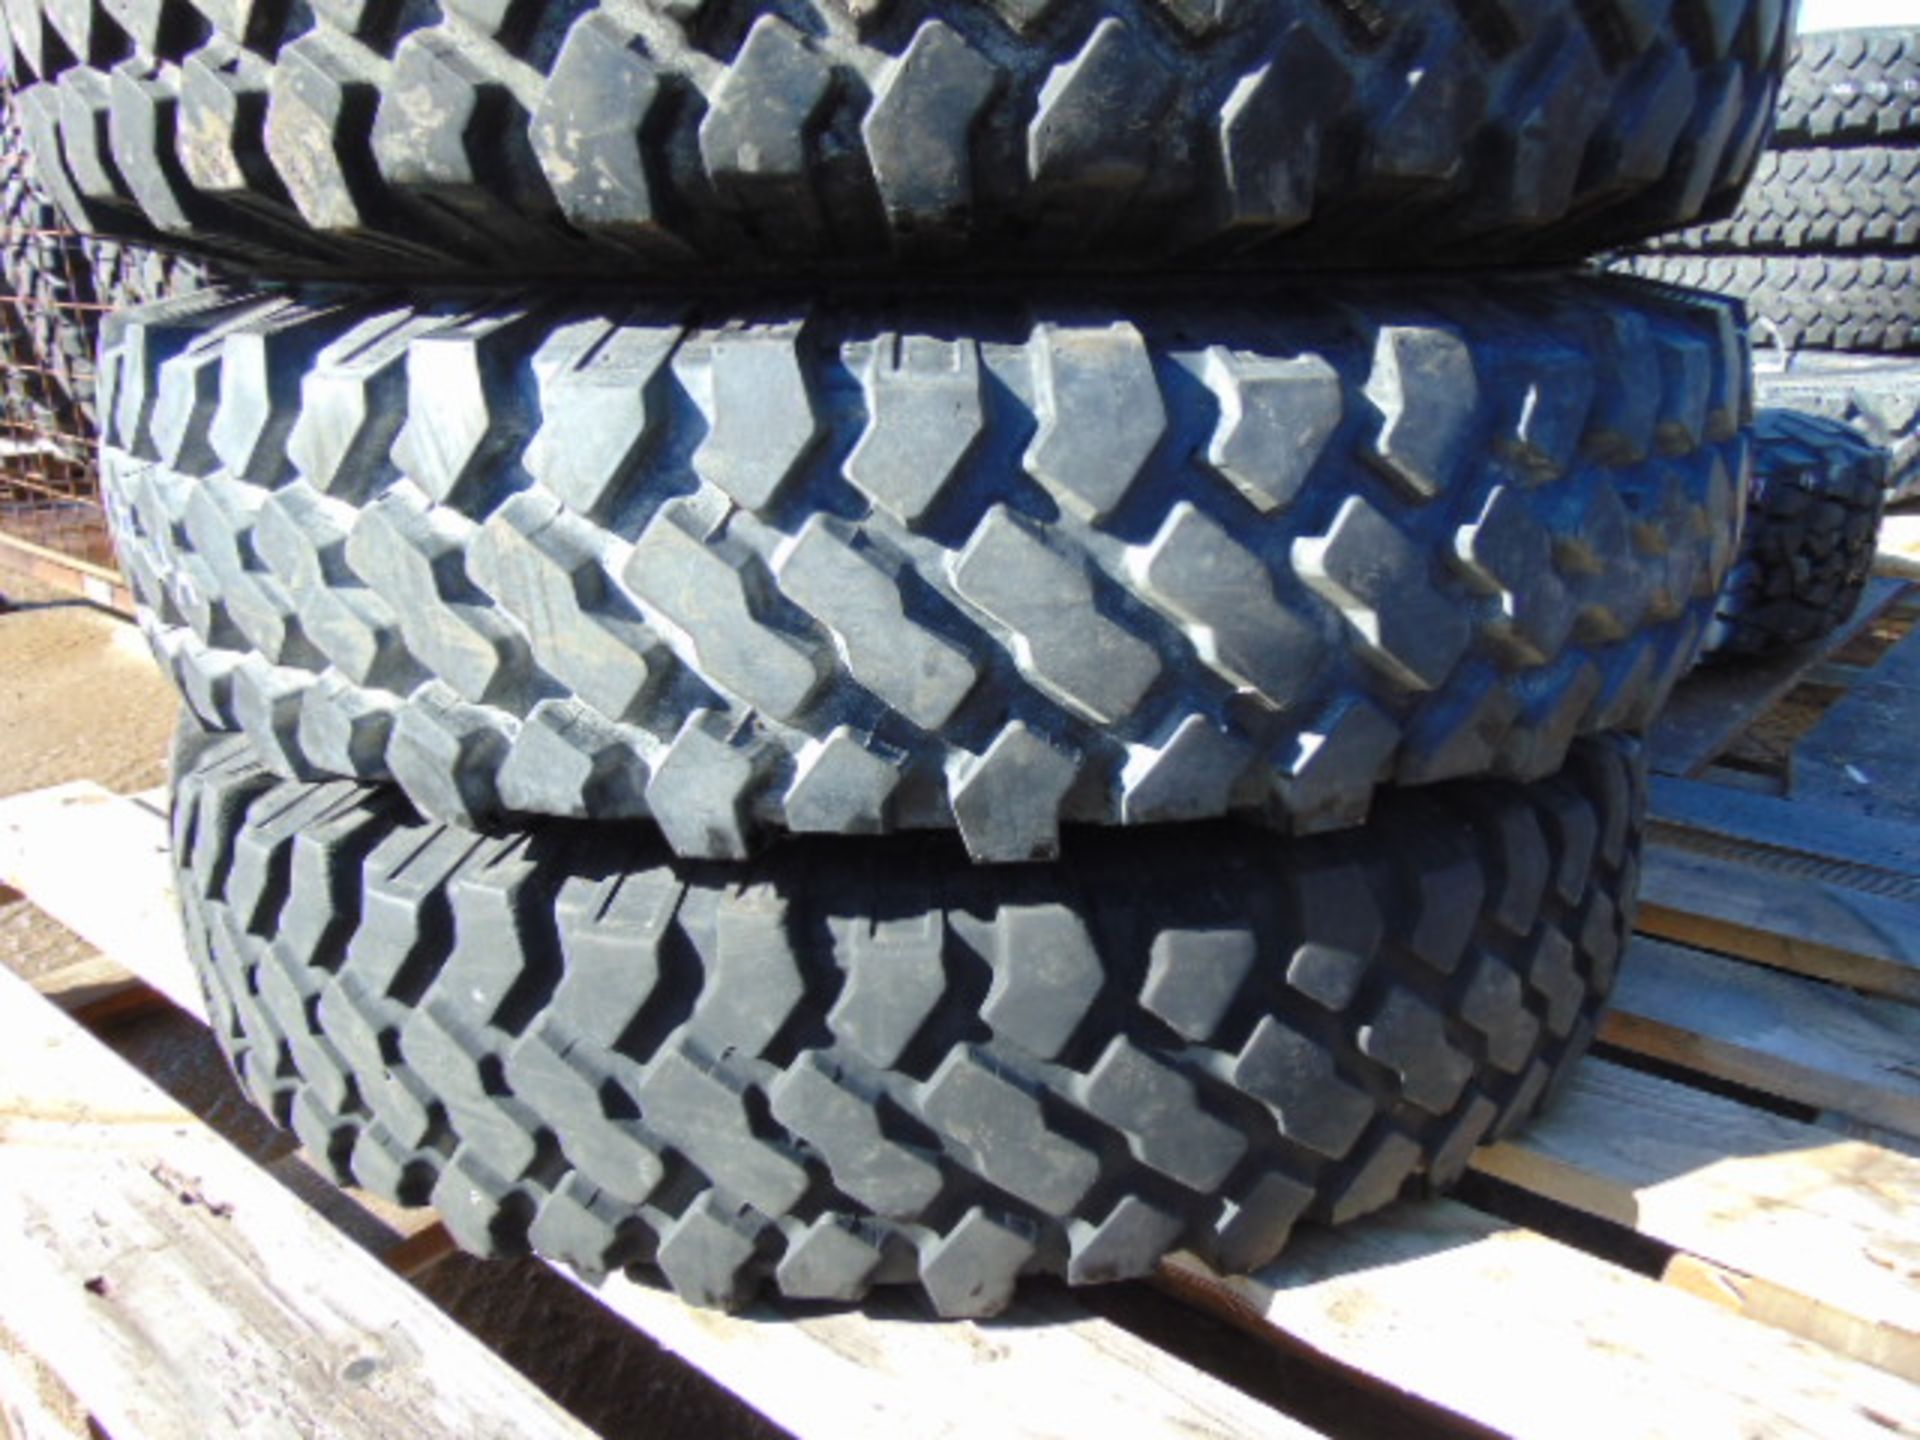 4 x Michelin XZL 7.50 R16 Tyres - Image 3 of 6